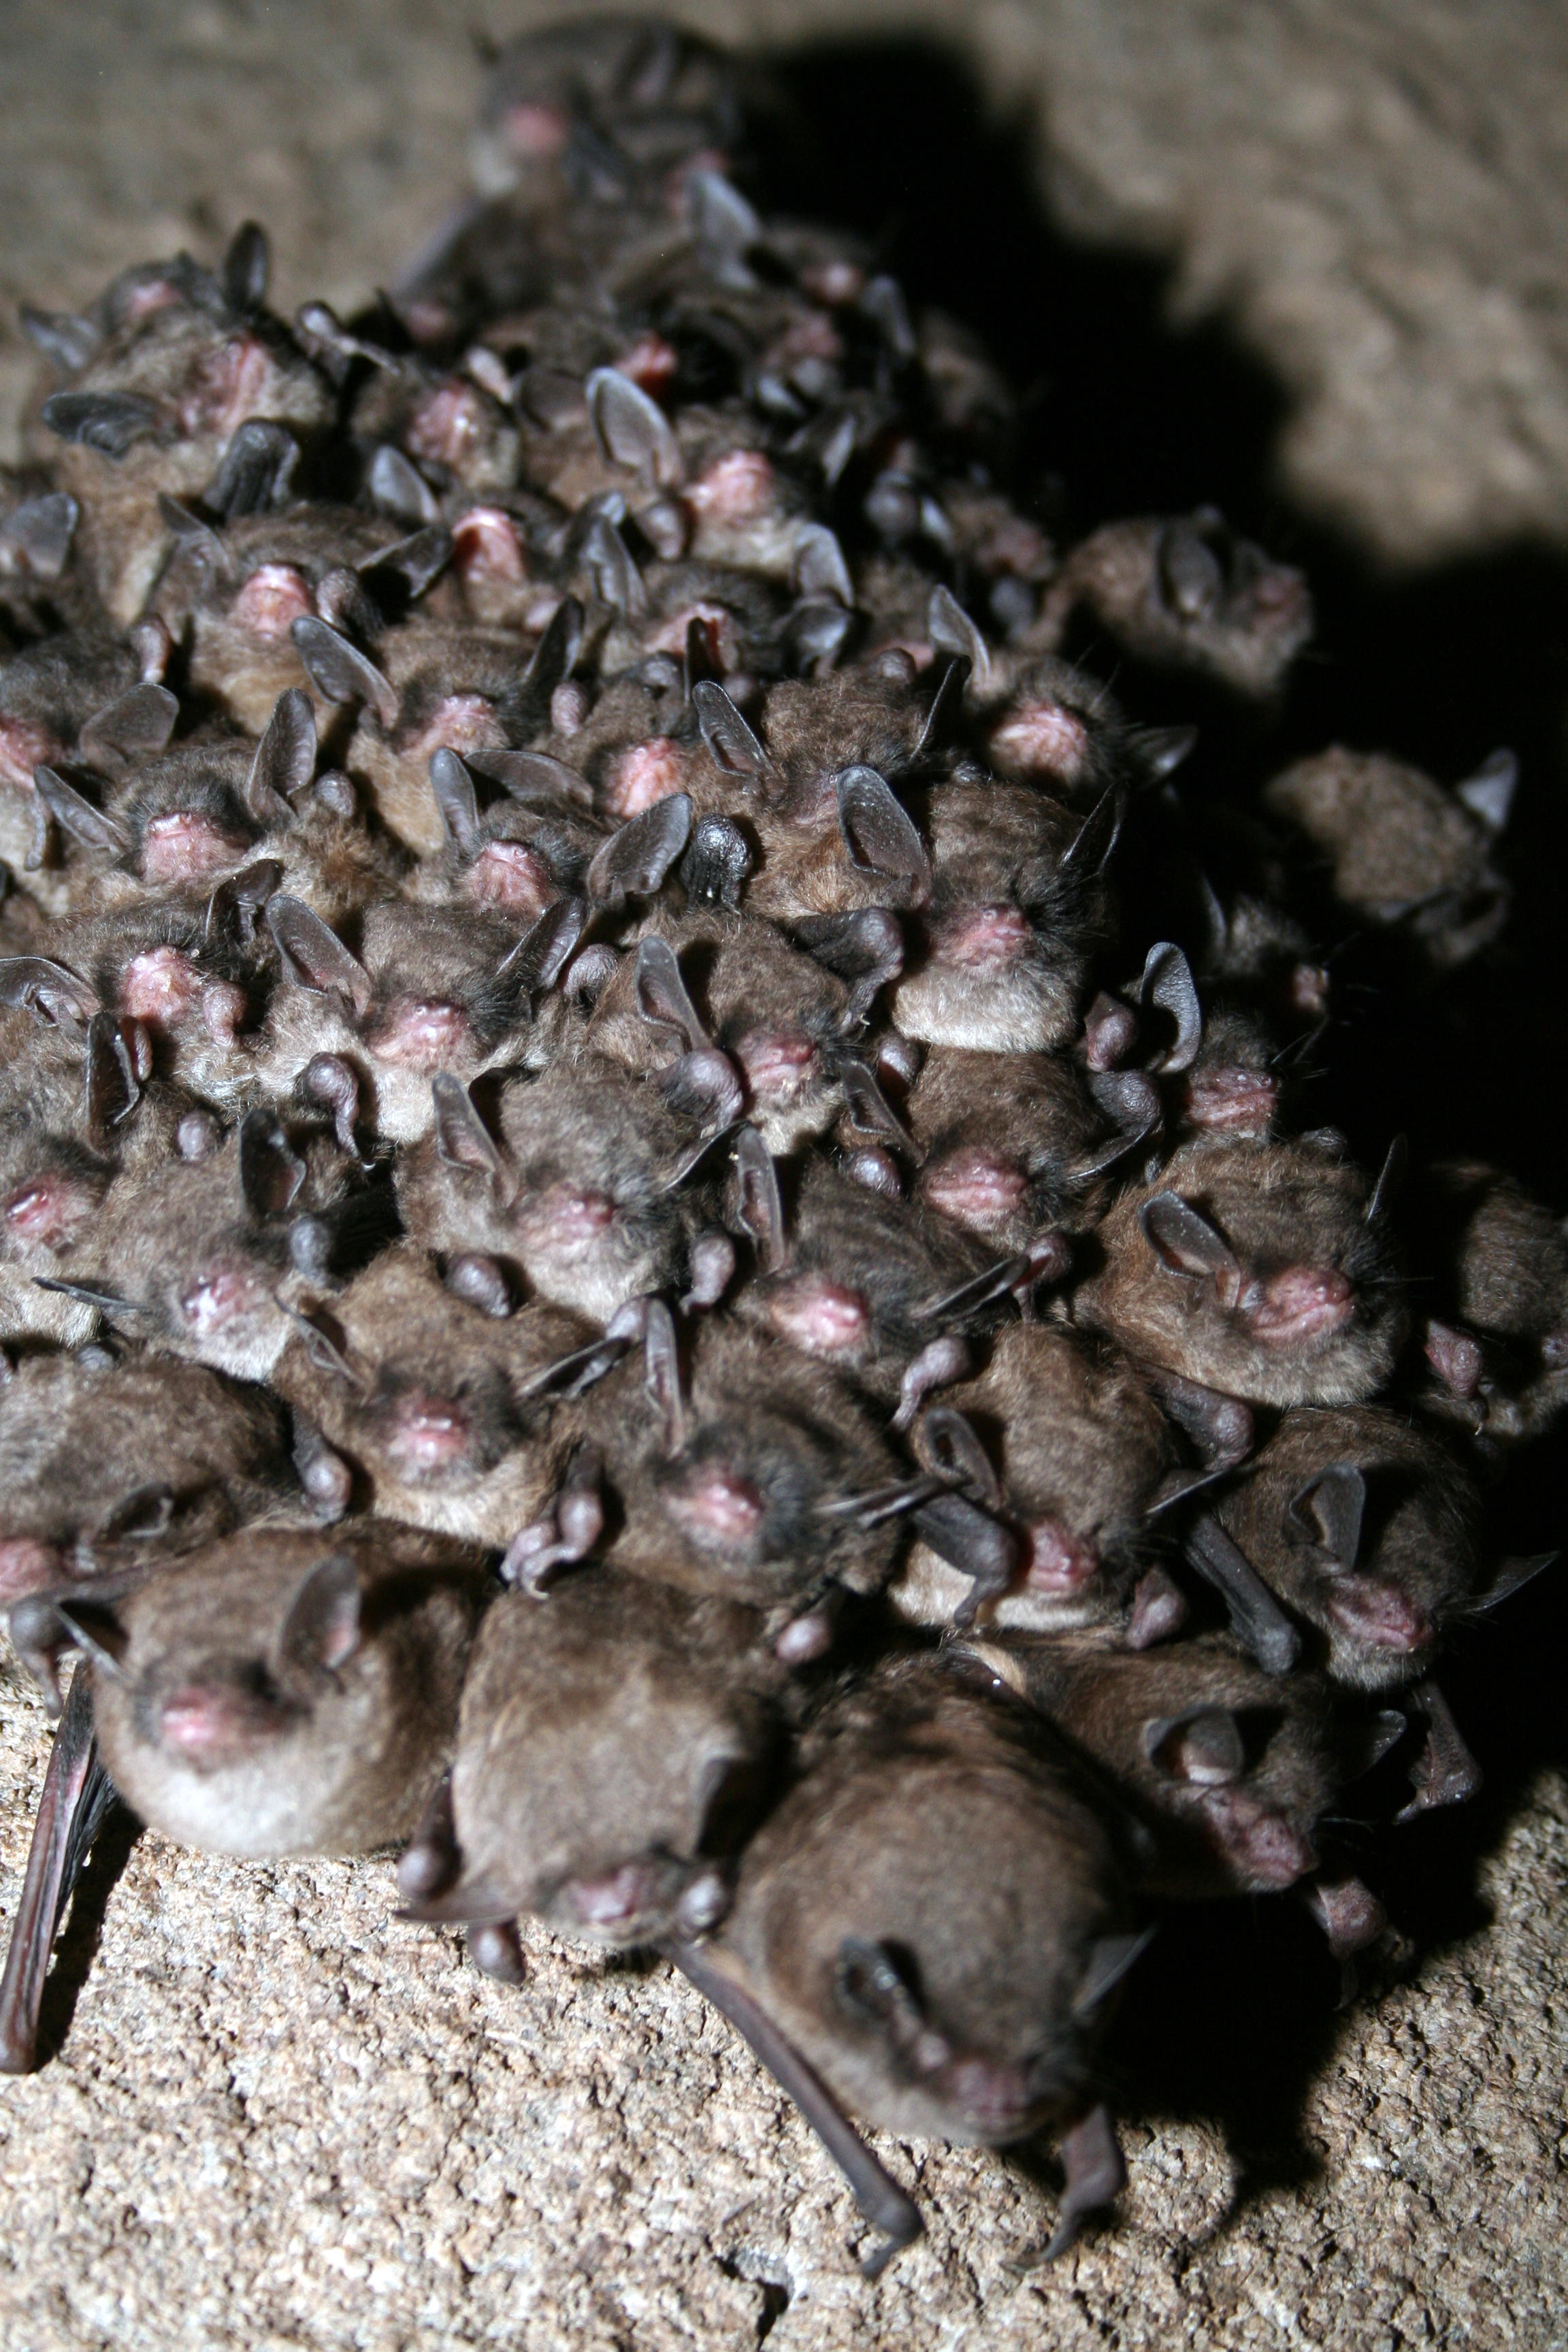 Tens of small brown bats clustered together